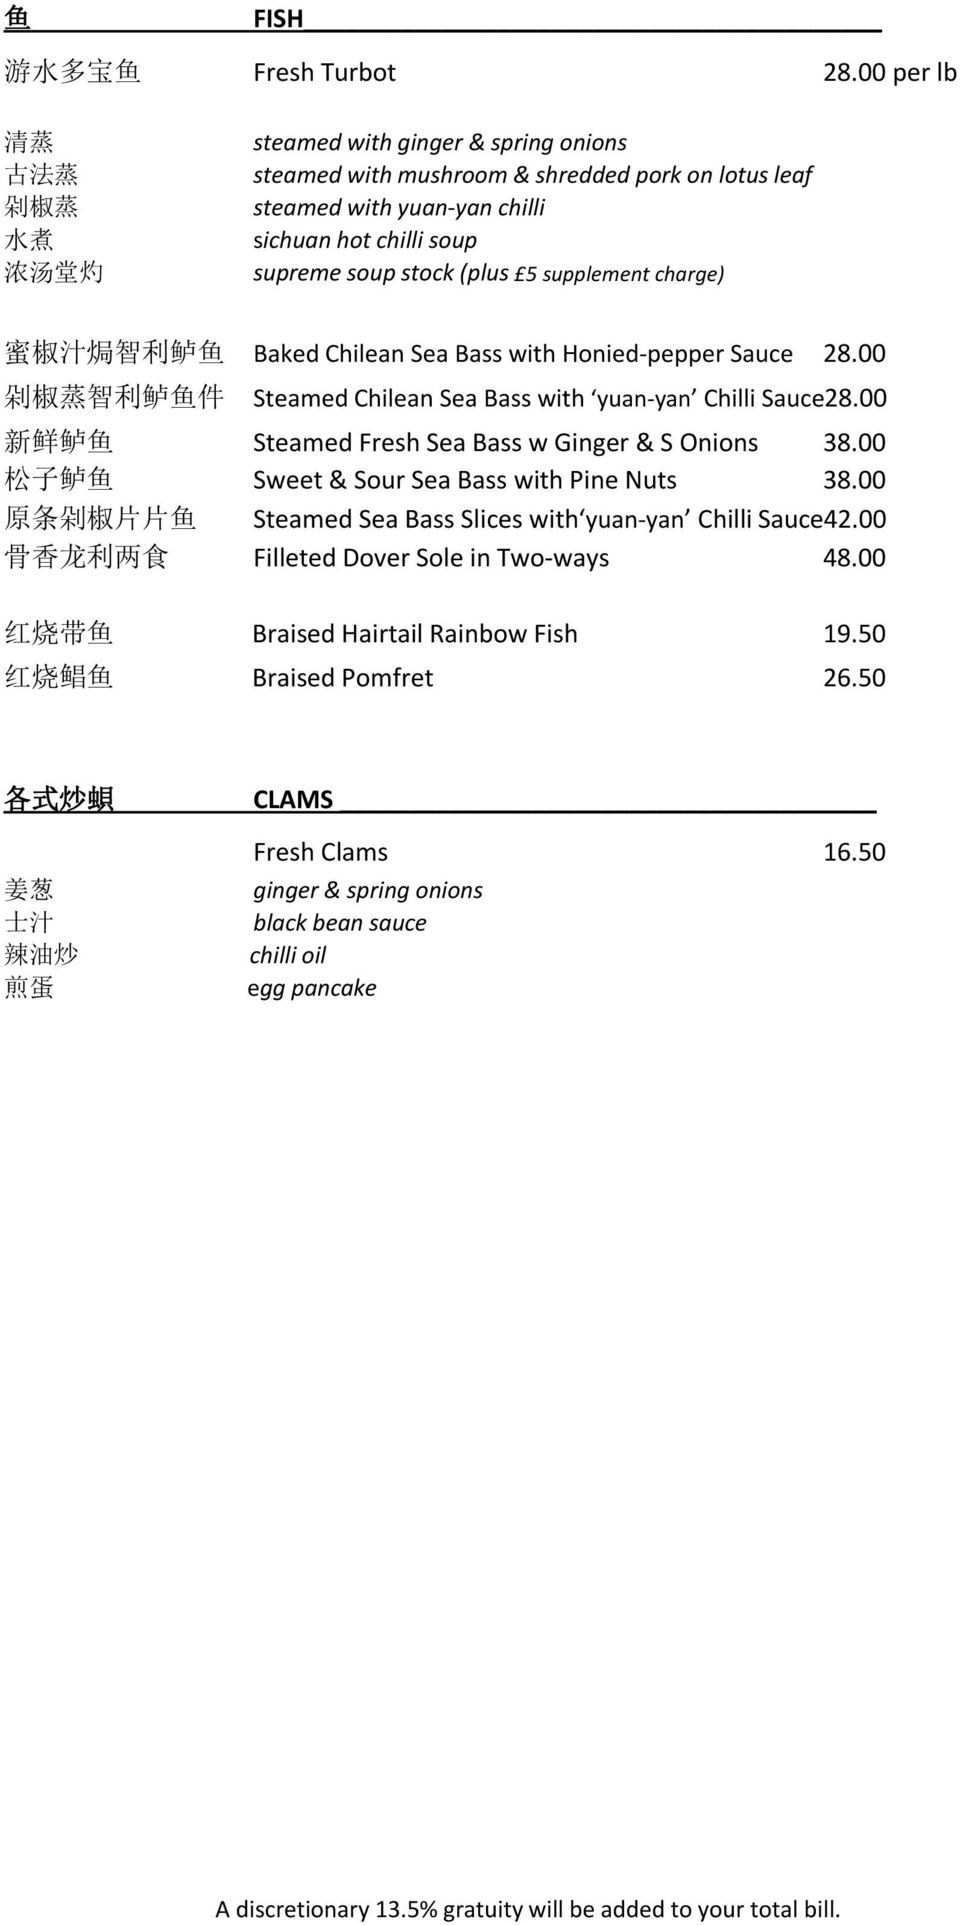 (plus 5 supplement charge) 蜜 椒 汁 焗 智 利 鲈 鱼 Baked Chilean Sea Bass with Honied-pepper Sauce 28.00 剁 椒 蒸 智 利 鲈 鱼 件 Steamed Chilean Sea Bass with yuan-yan Chilli Sauce28.